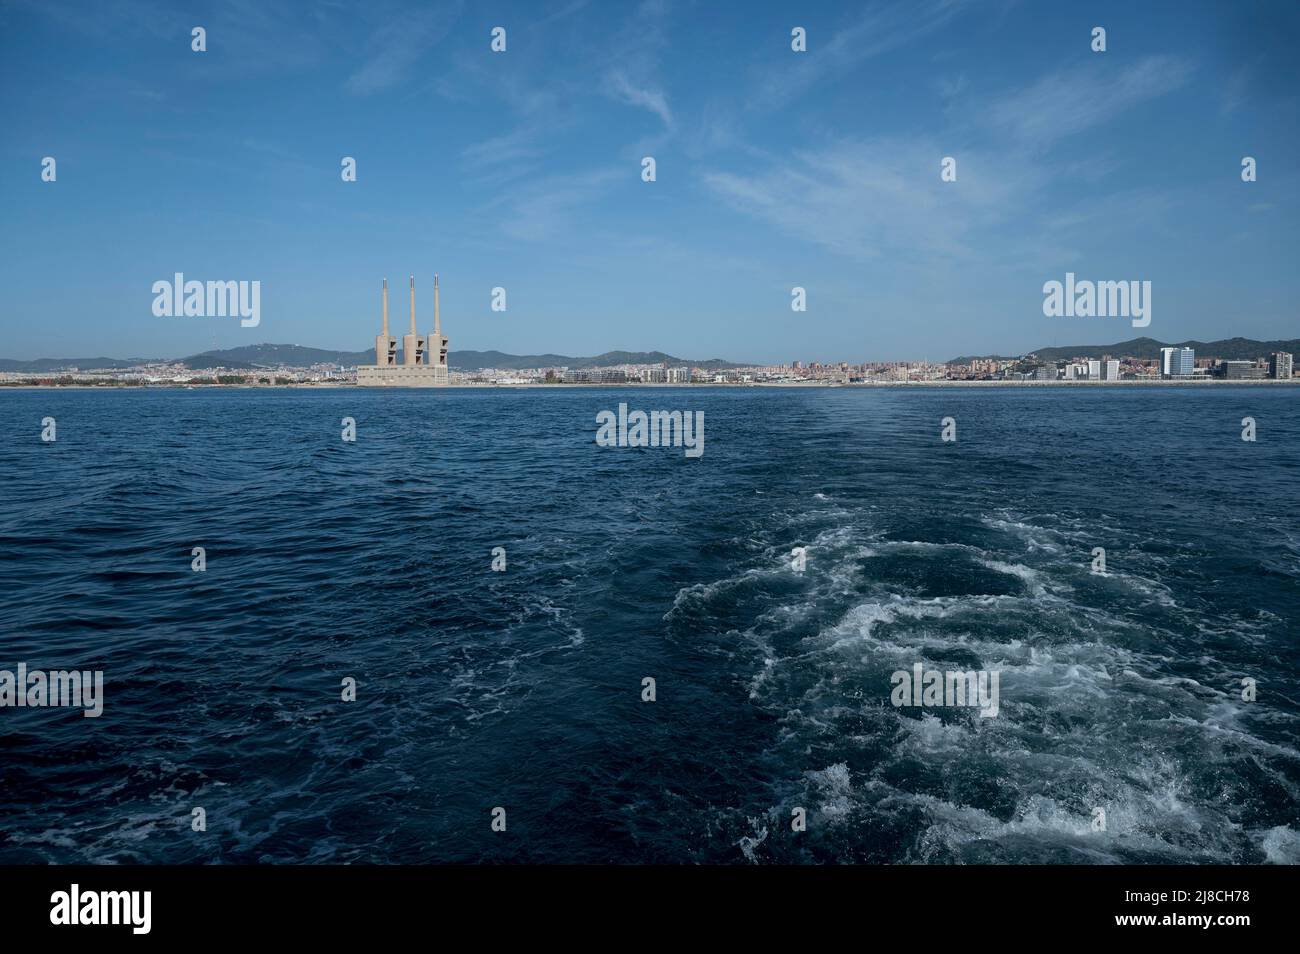 May 15, 2022, Badalona, Catanzaro, Spain: The port of Badalona seen from afar. The Spanish NGO Open Arms starts a new rescue mission in Central Mediterranean area, with their first sailboat Astral. (Credit Image: © Valeria Ferraro/ZUMA Press Wire) Stock Photo